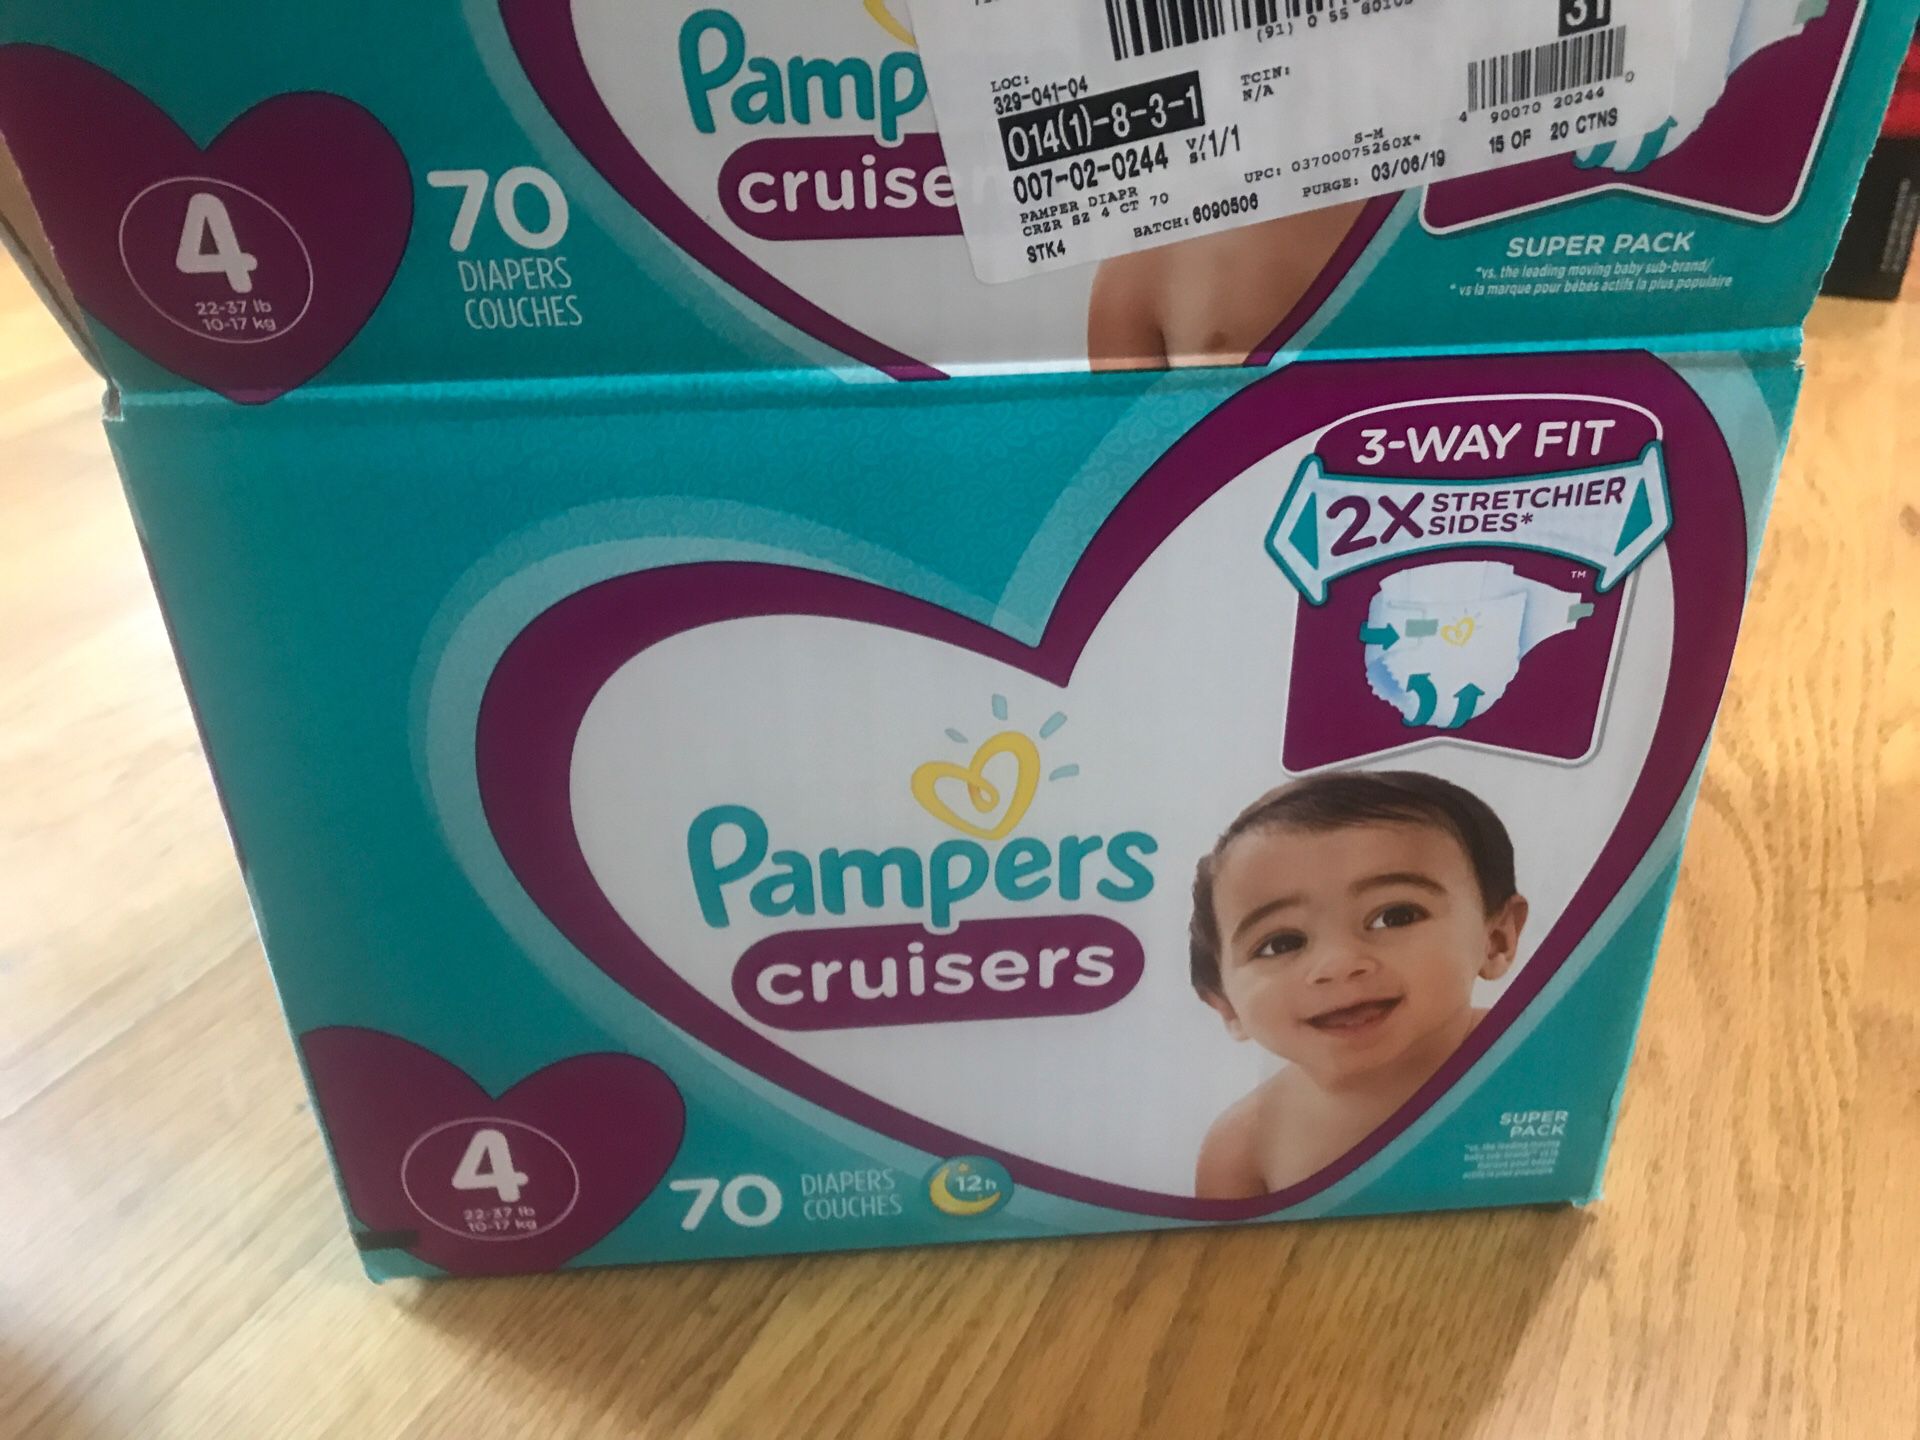 1 package of size 4 pampers cruisers